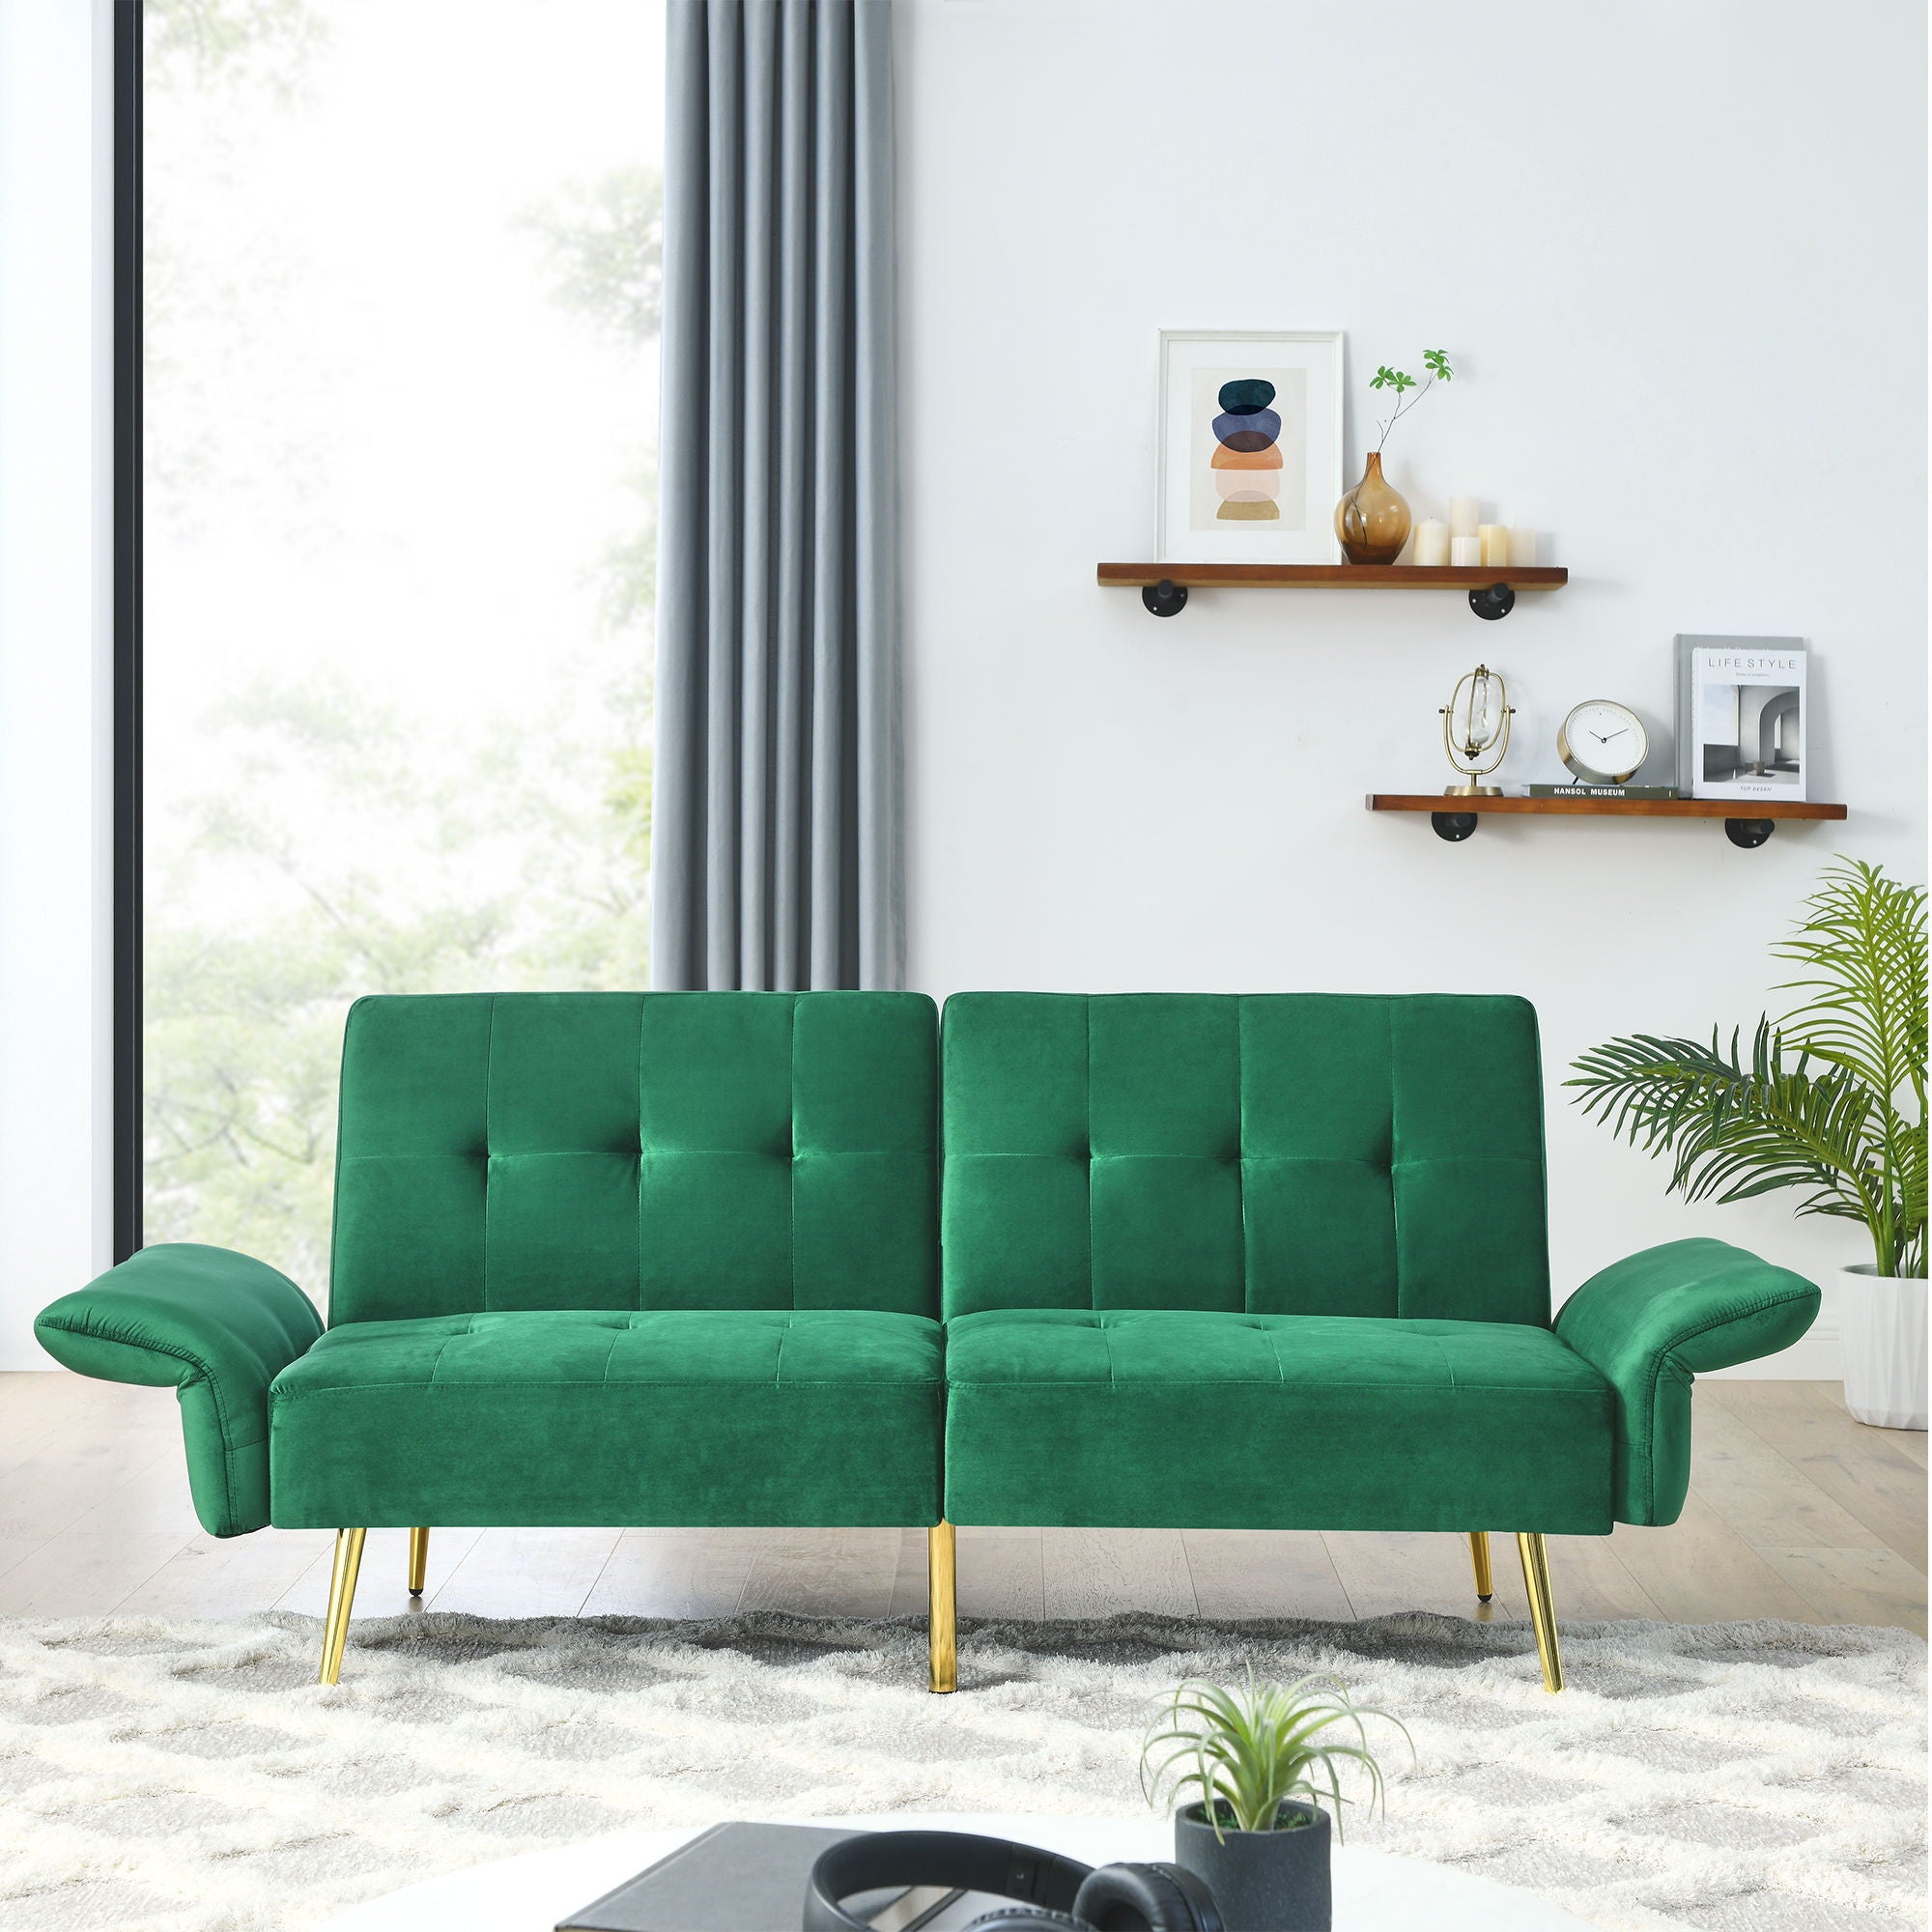 Italian Futon Sofa Bed, Convertible Sleeper Loveseat Couch With Folded Armrests And Storage Bags For Living Room And Small Space, Green